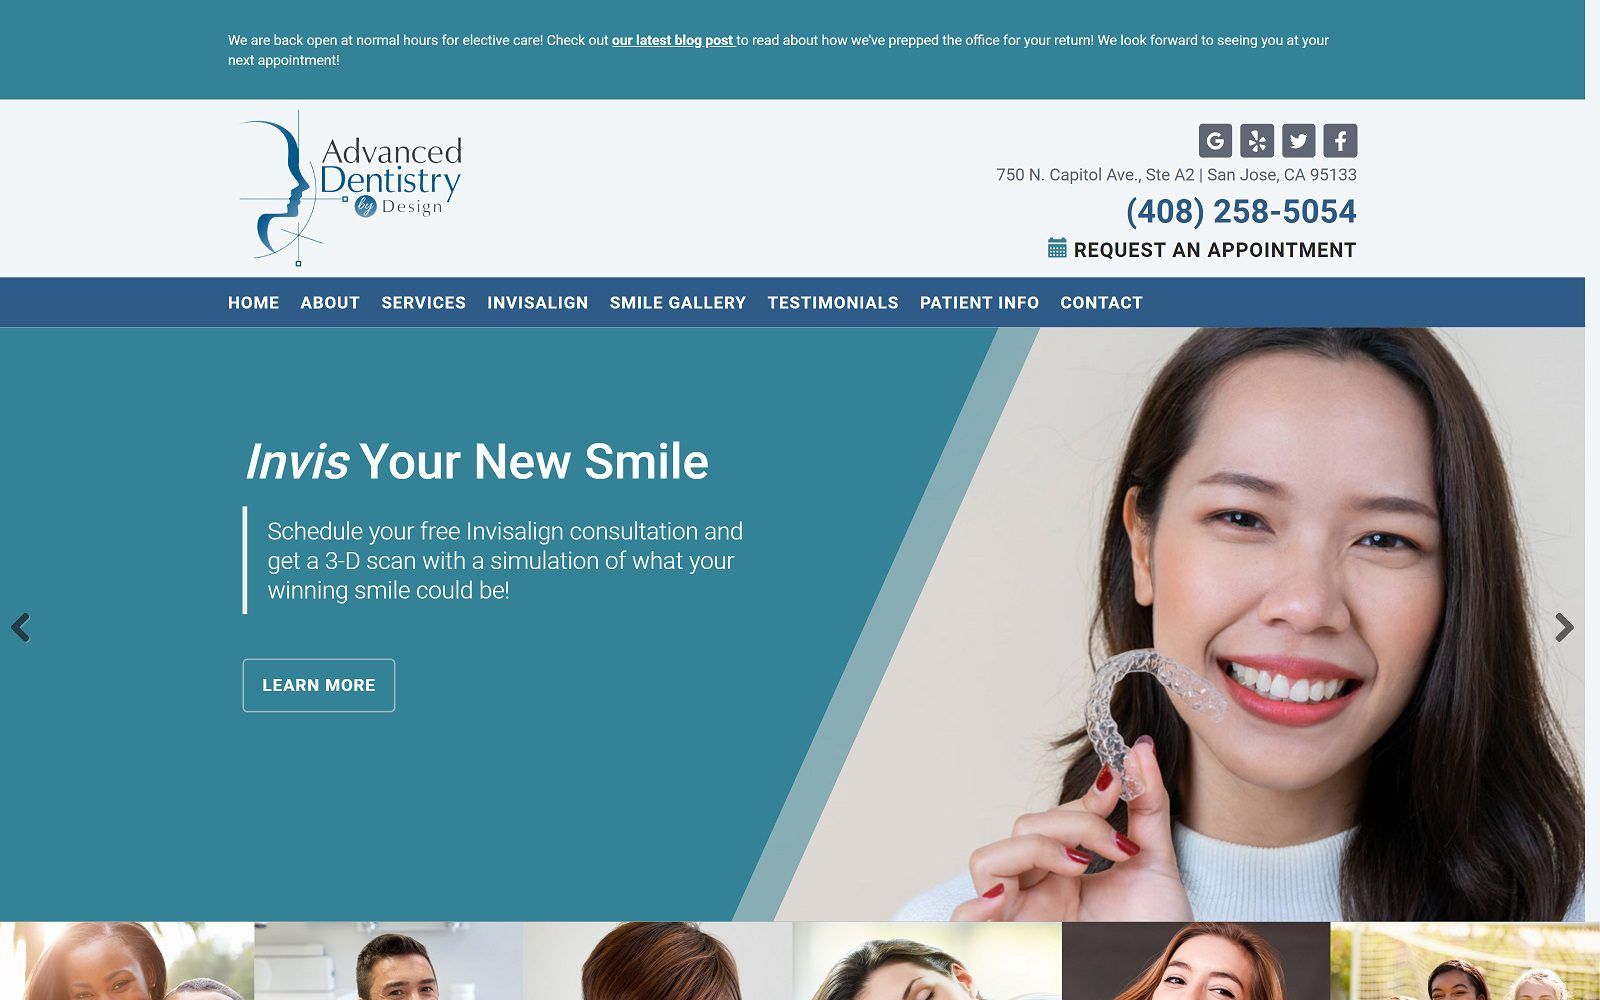 The screenshot of advanced dentistry by design website